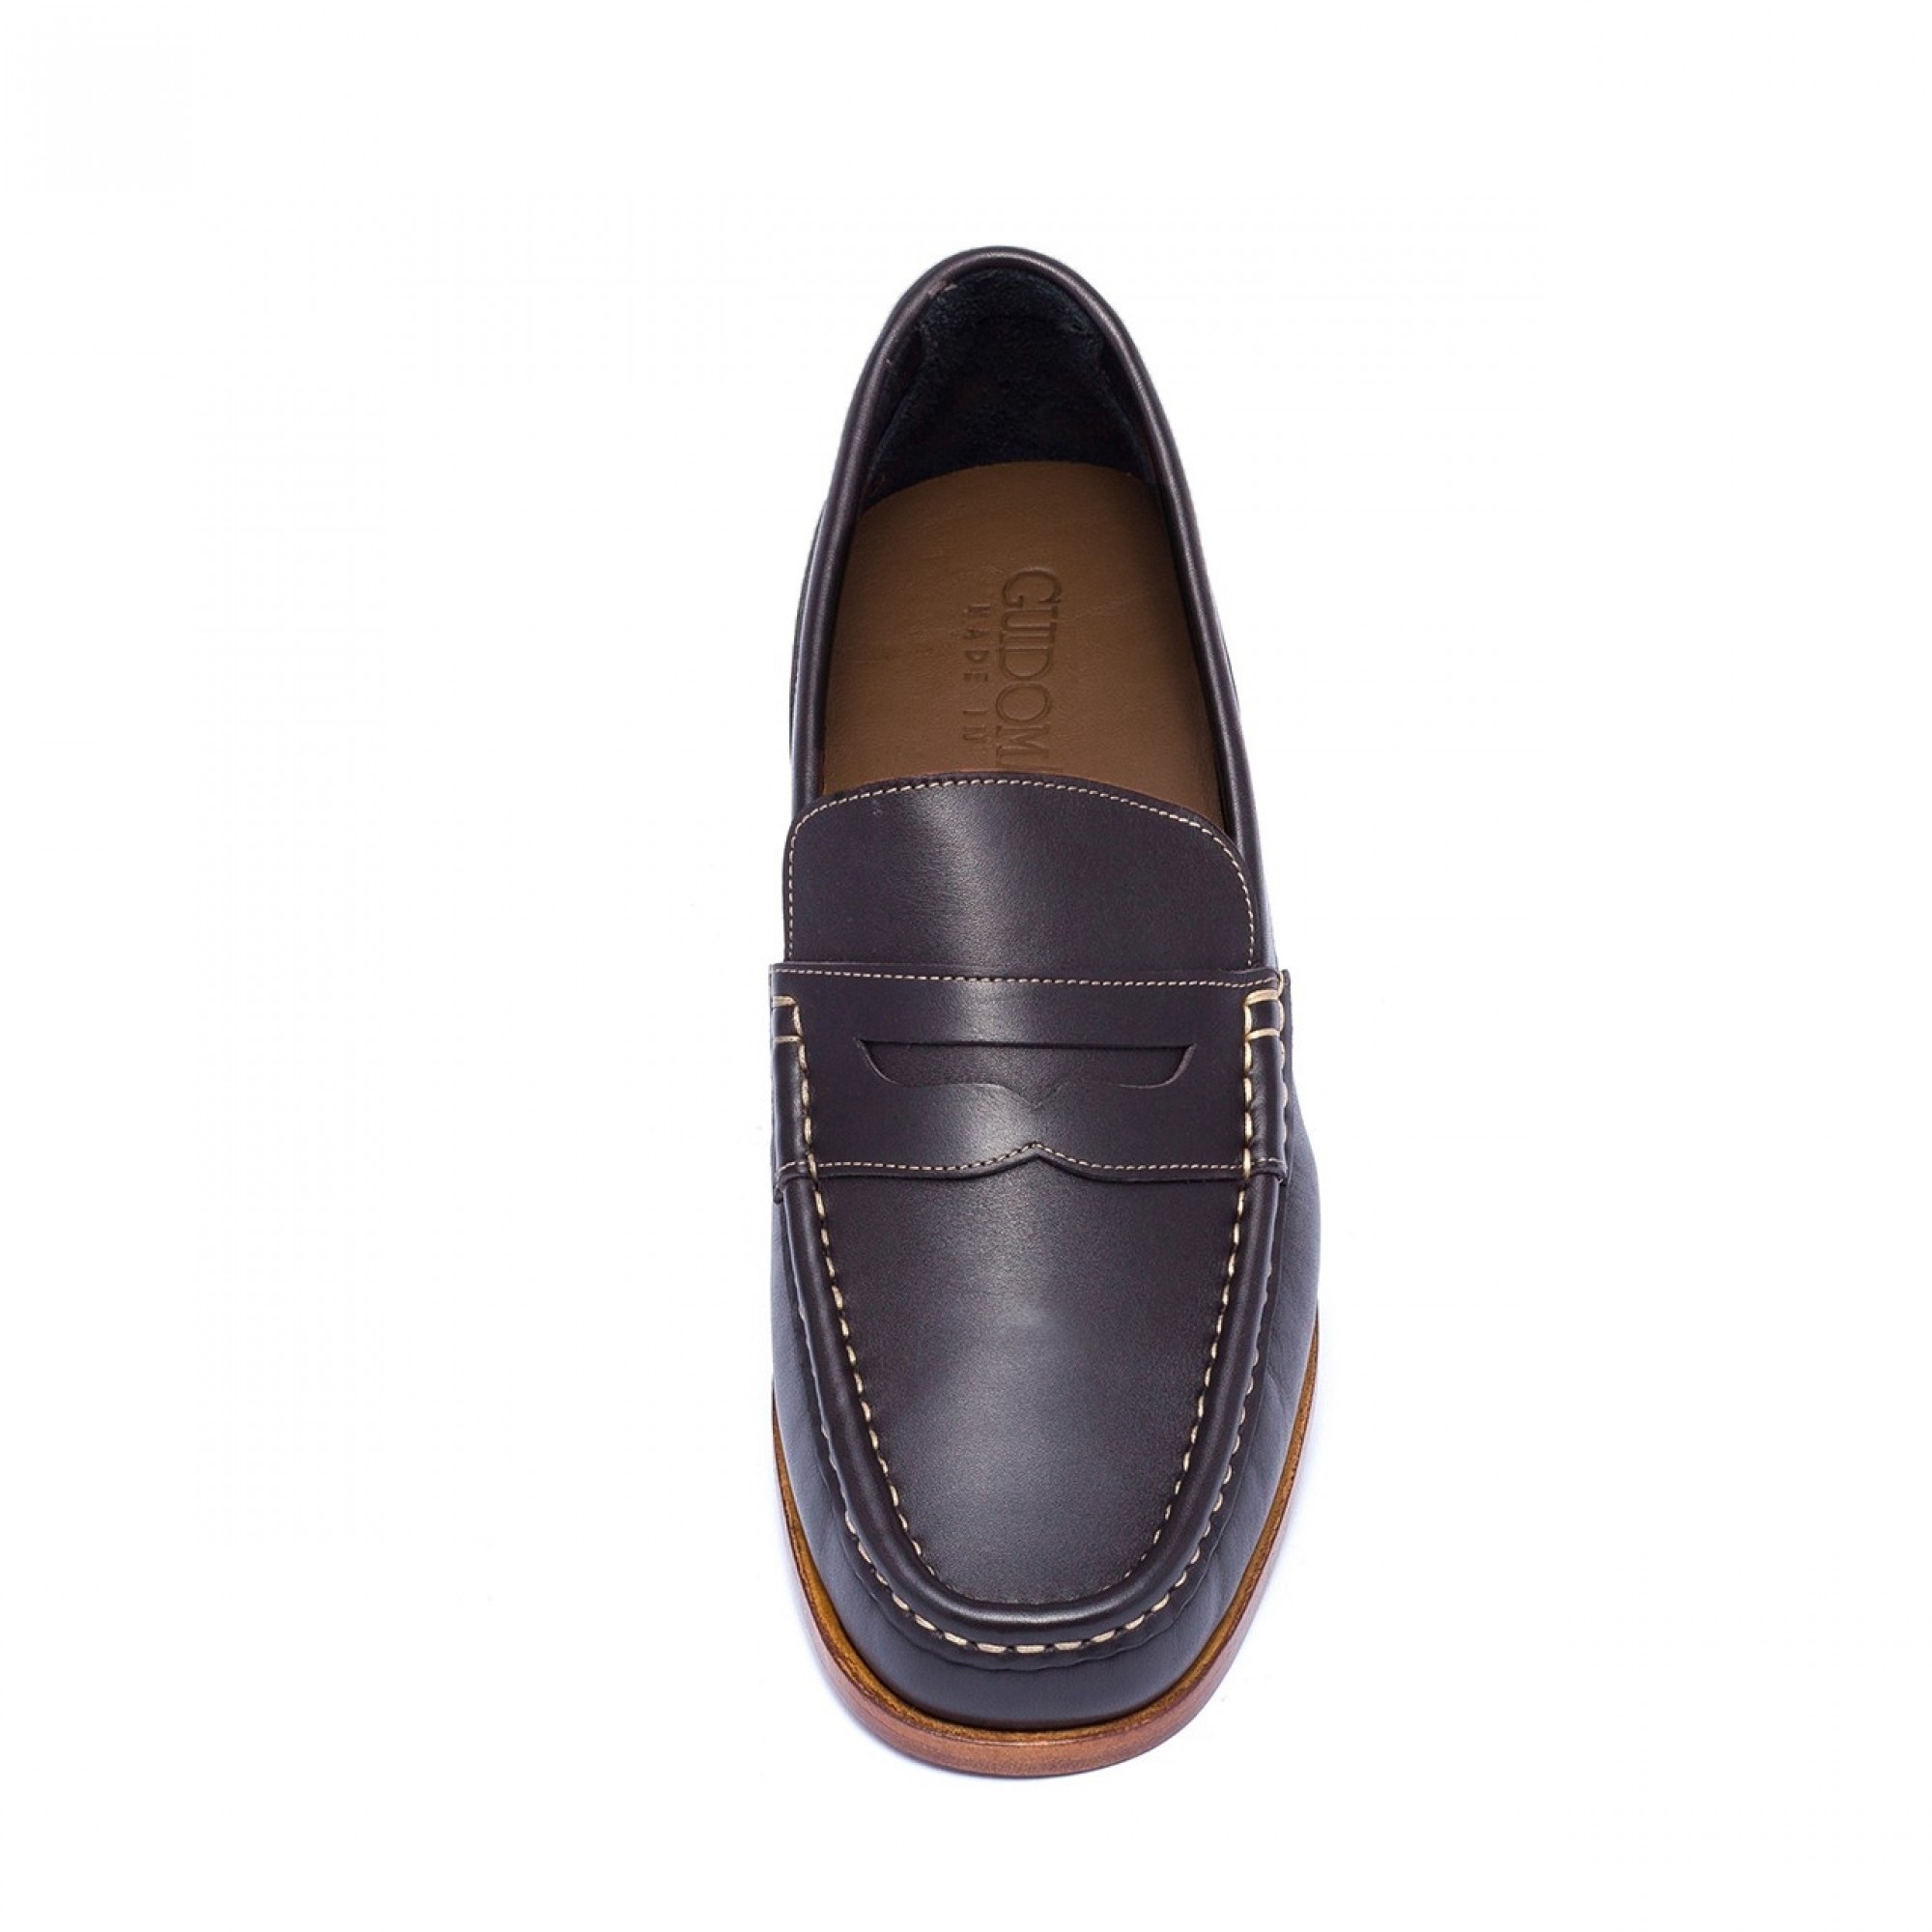 Muscat - Elevator Loafers in Full grain Leather up to 2.6 inches